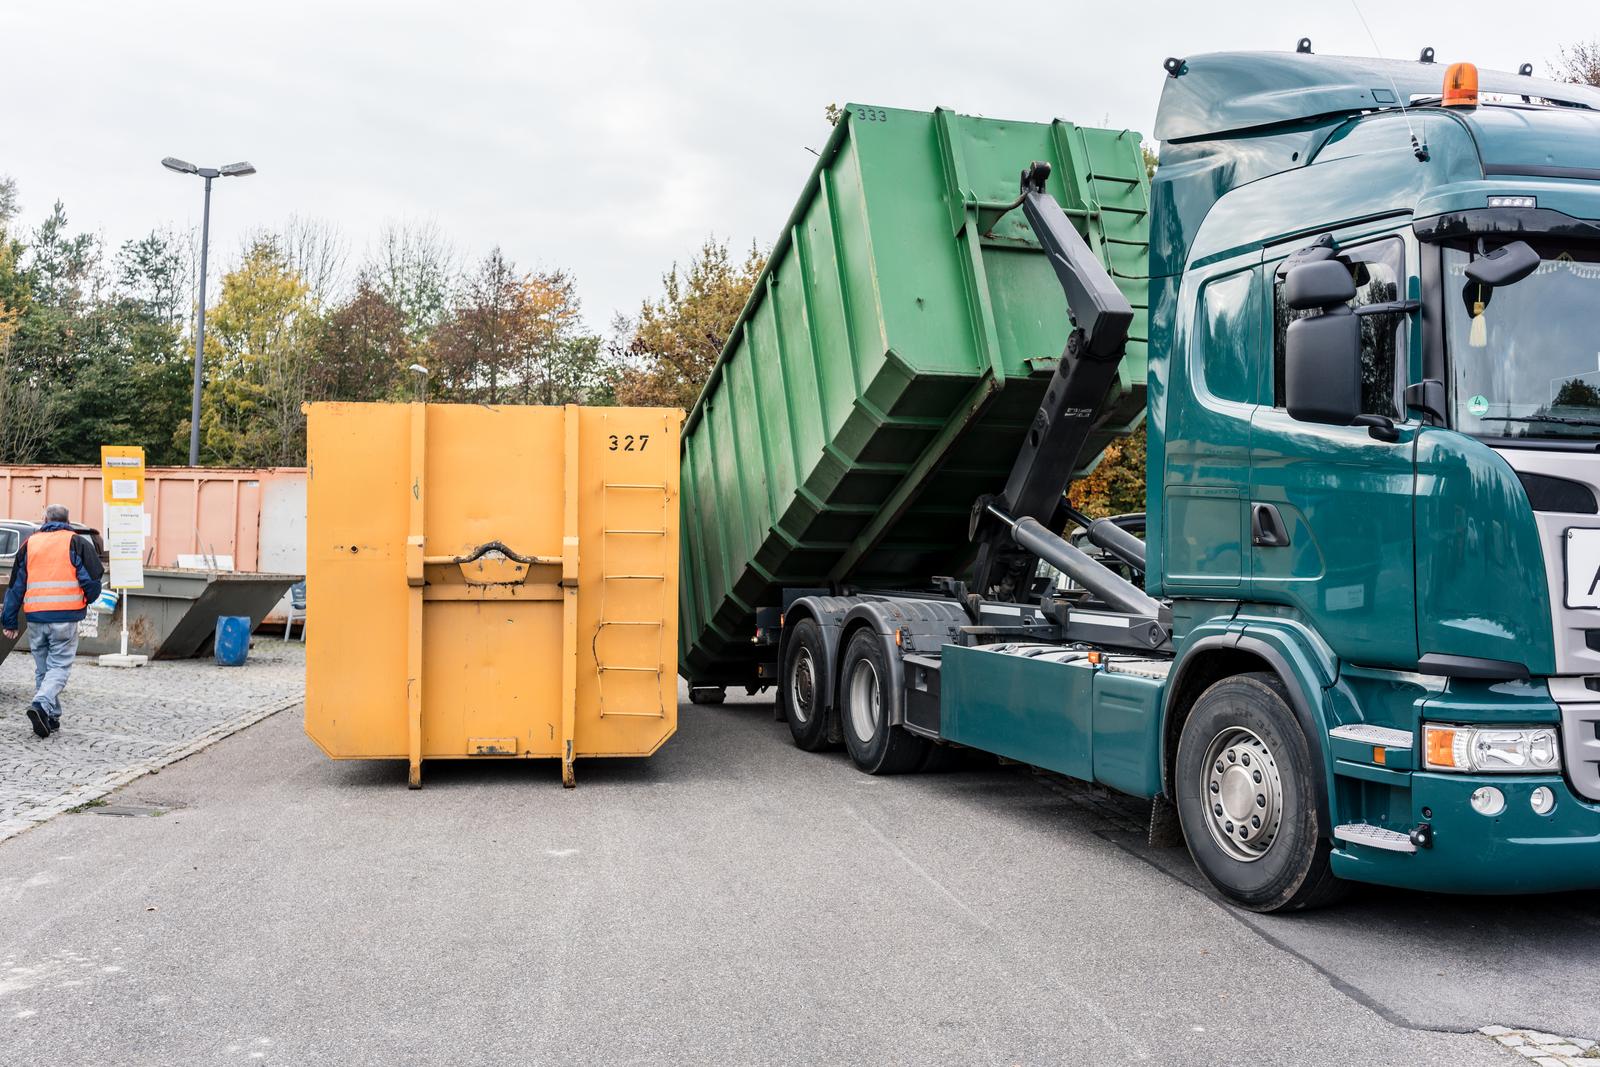 Hgv Driving Course Cost